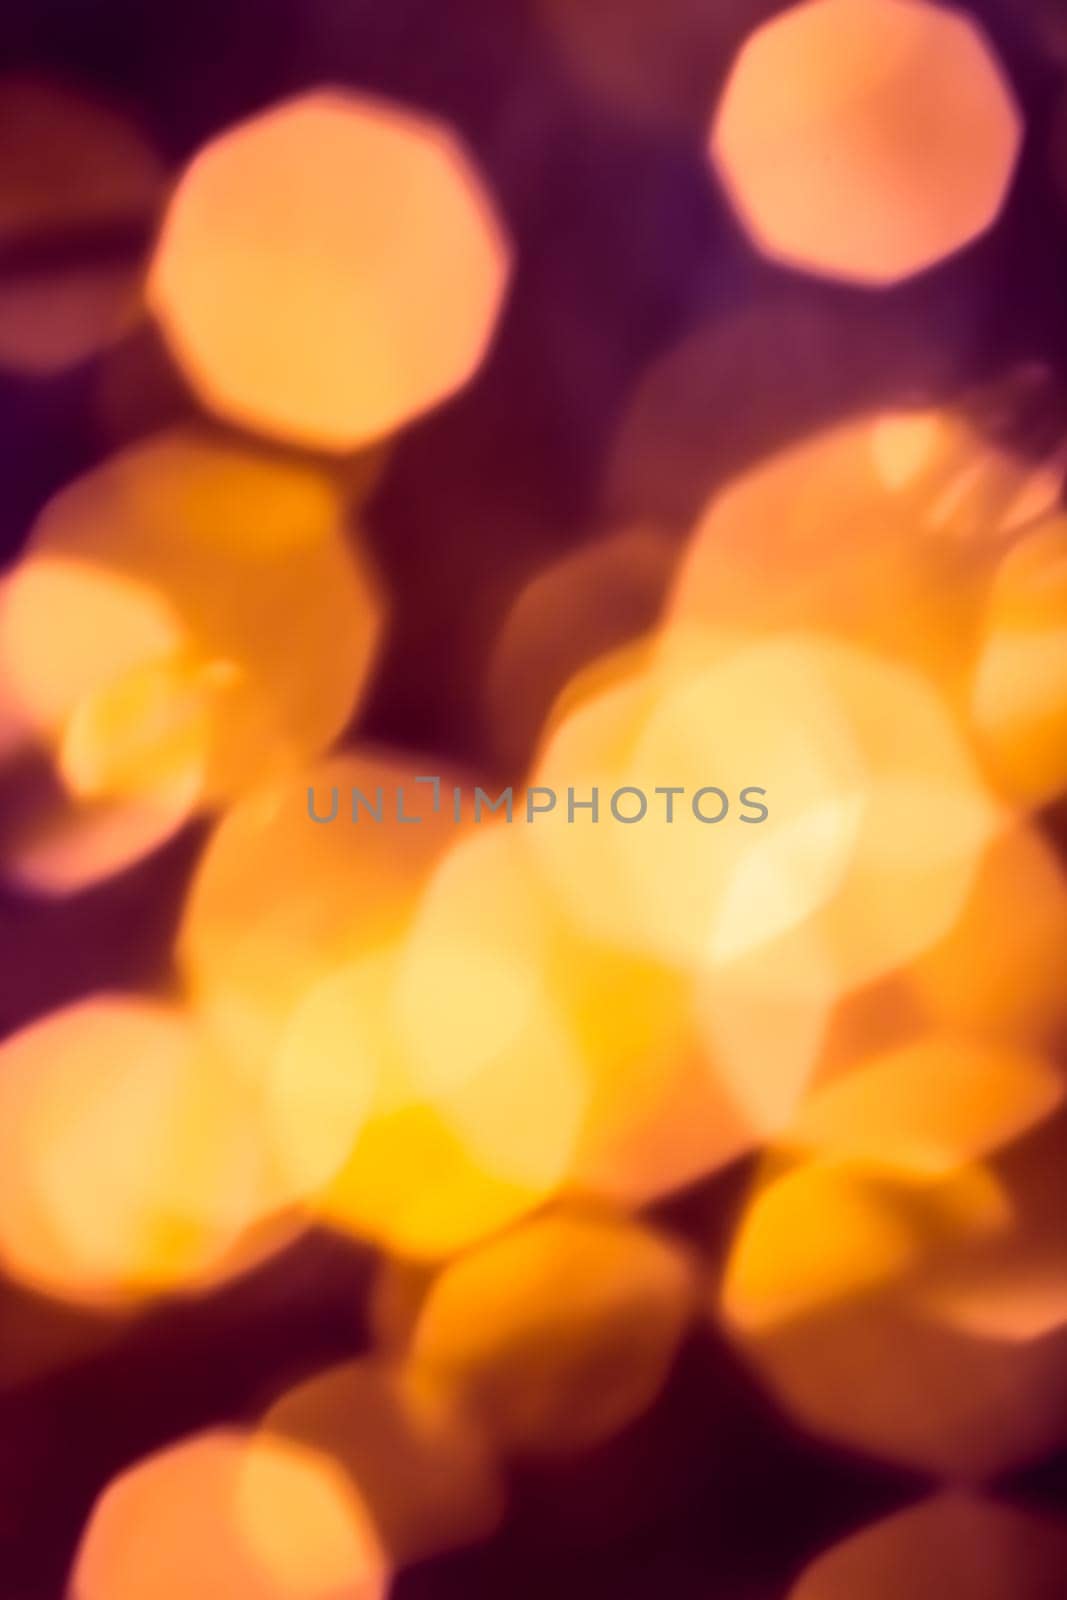 Glamorous golden shiny glow and glitter, luxury holiday background by Anneleven